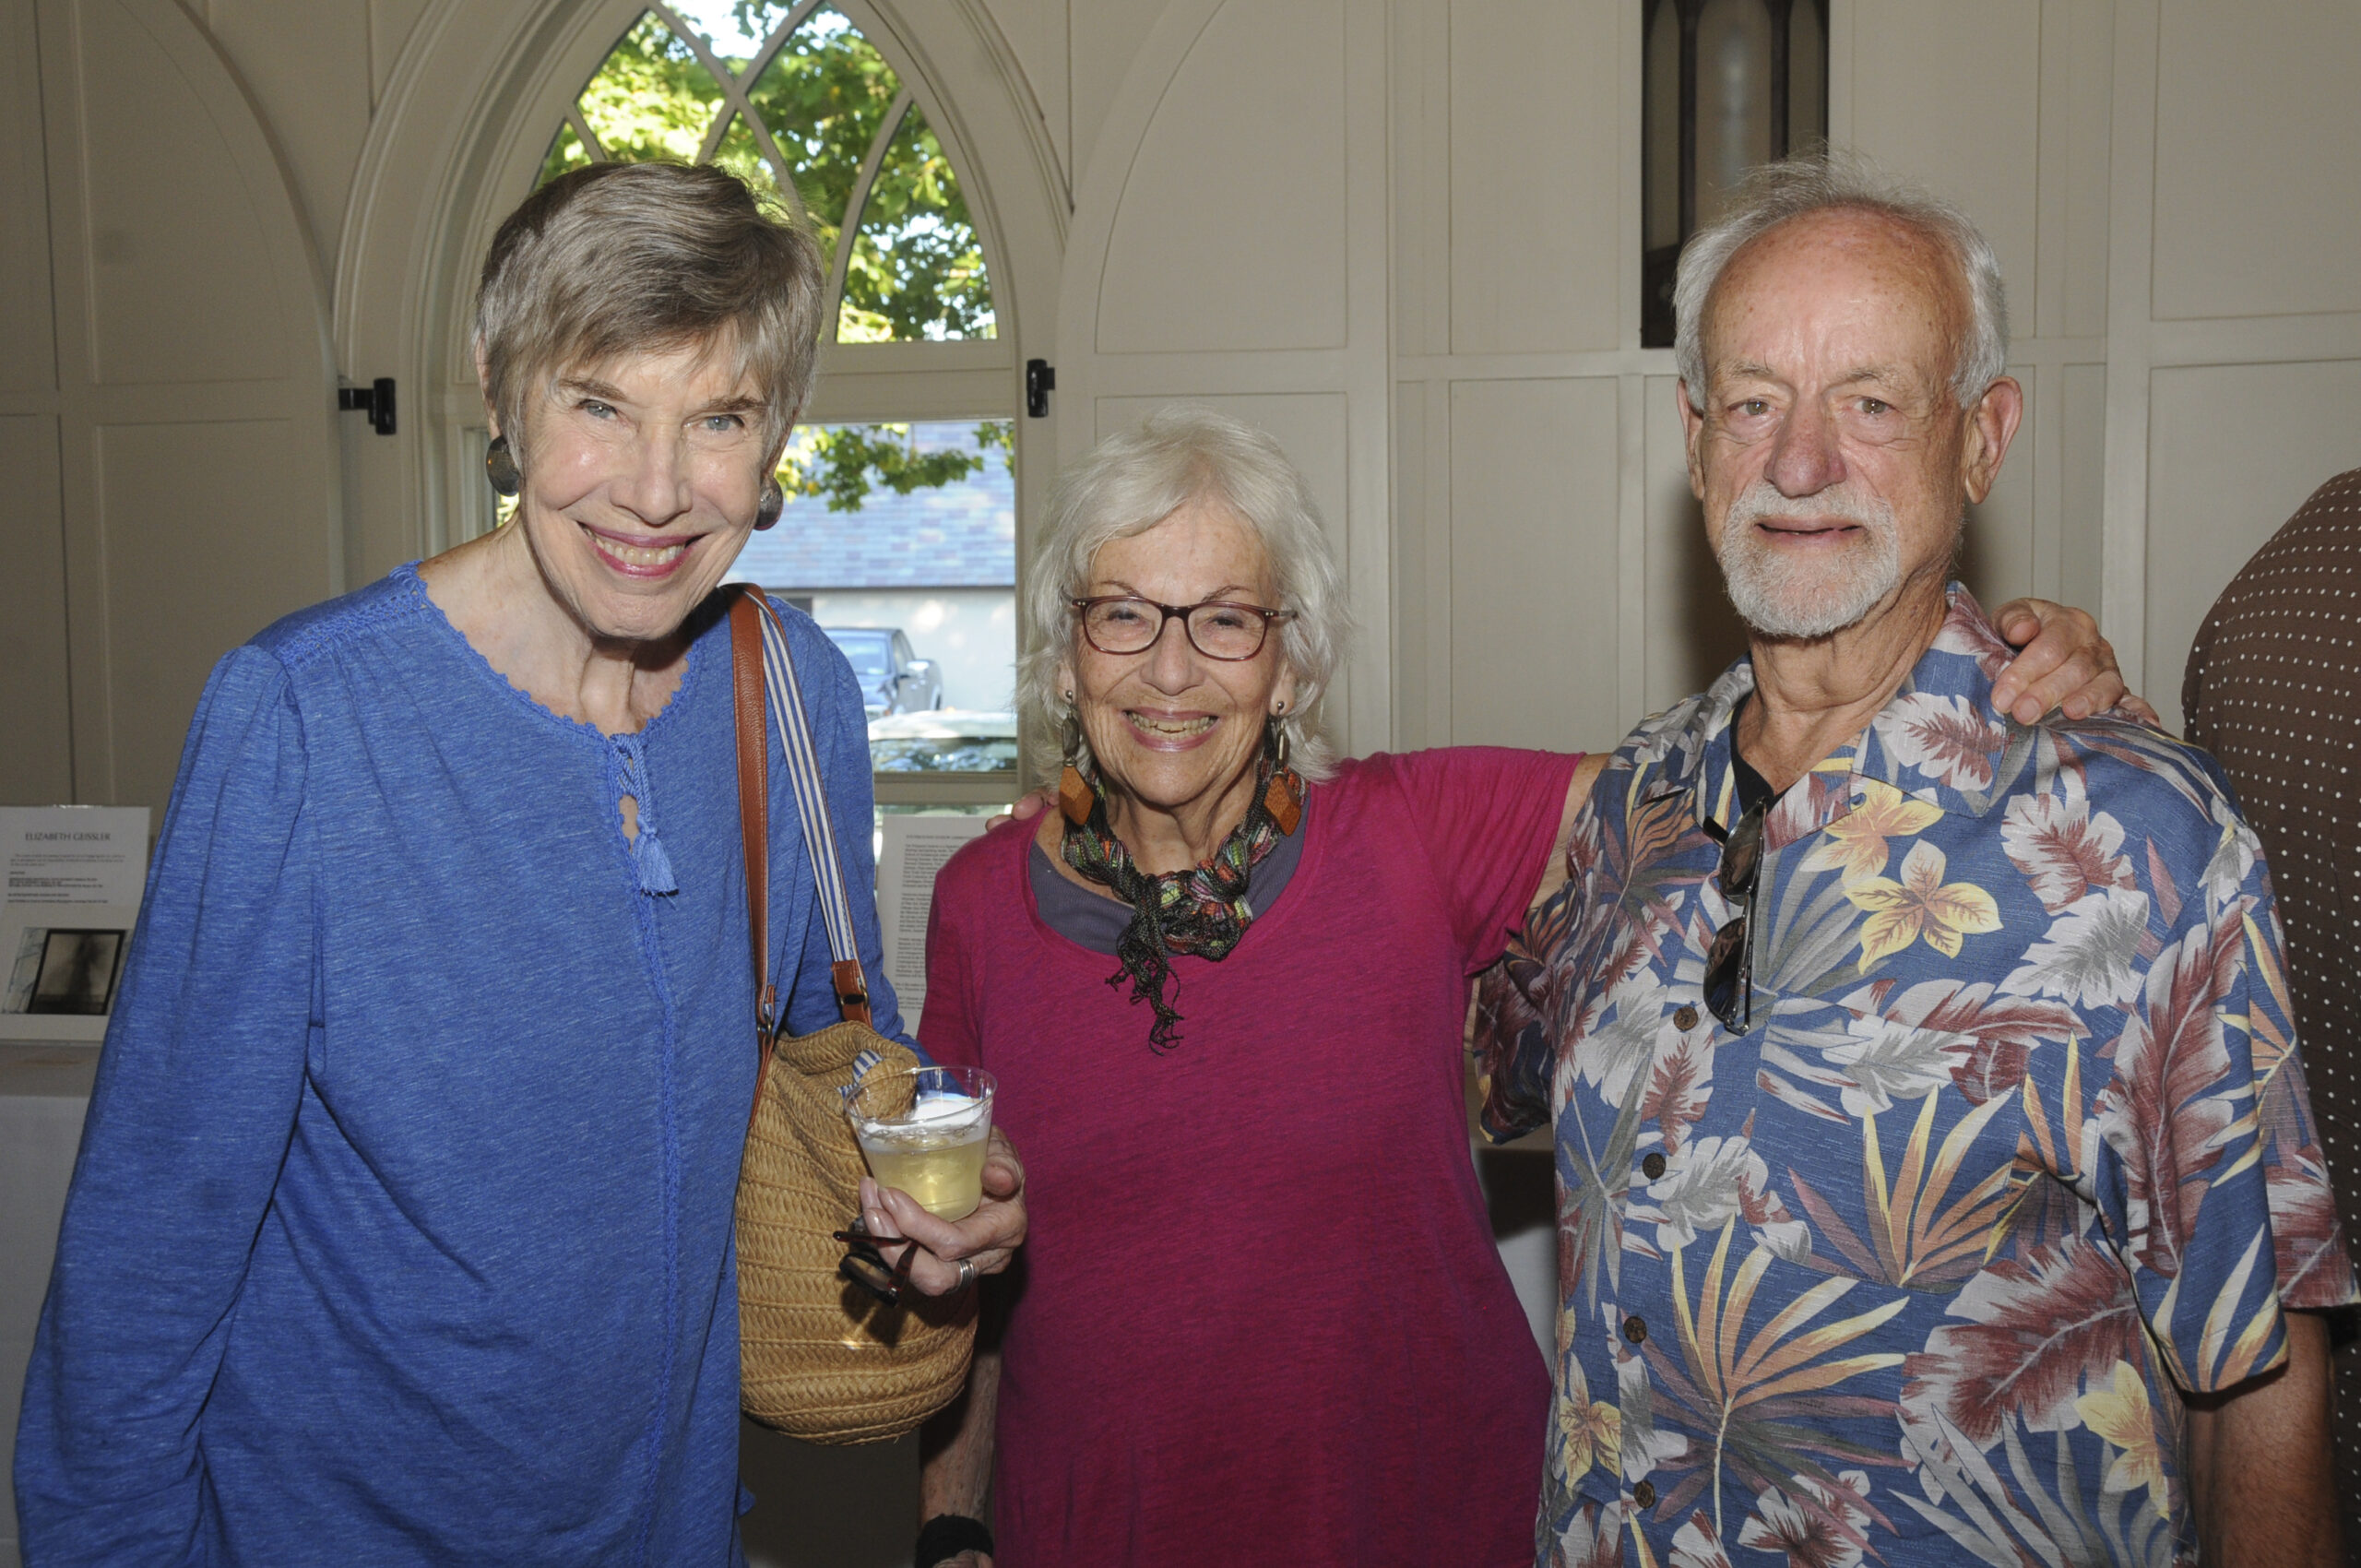 Catherine Crane, Julie Small-Gamby and Peter Gamby at the East End Hospice 21st annual Box Art Auction preview reception on August 24 at Hoie Hall at St. Luke's Church in East Hampton . Dozens of local artists contributed their vision and creation of 